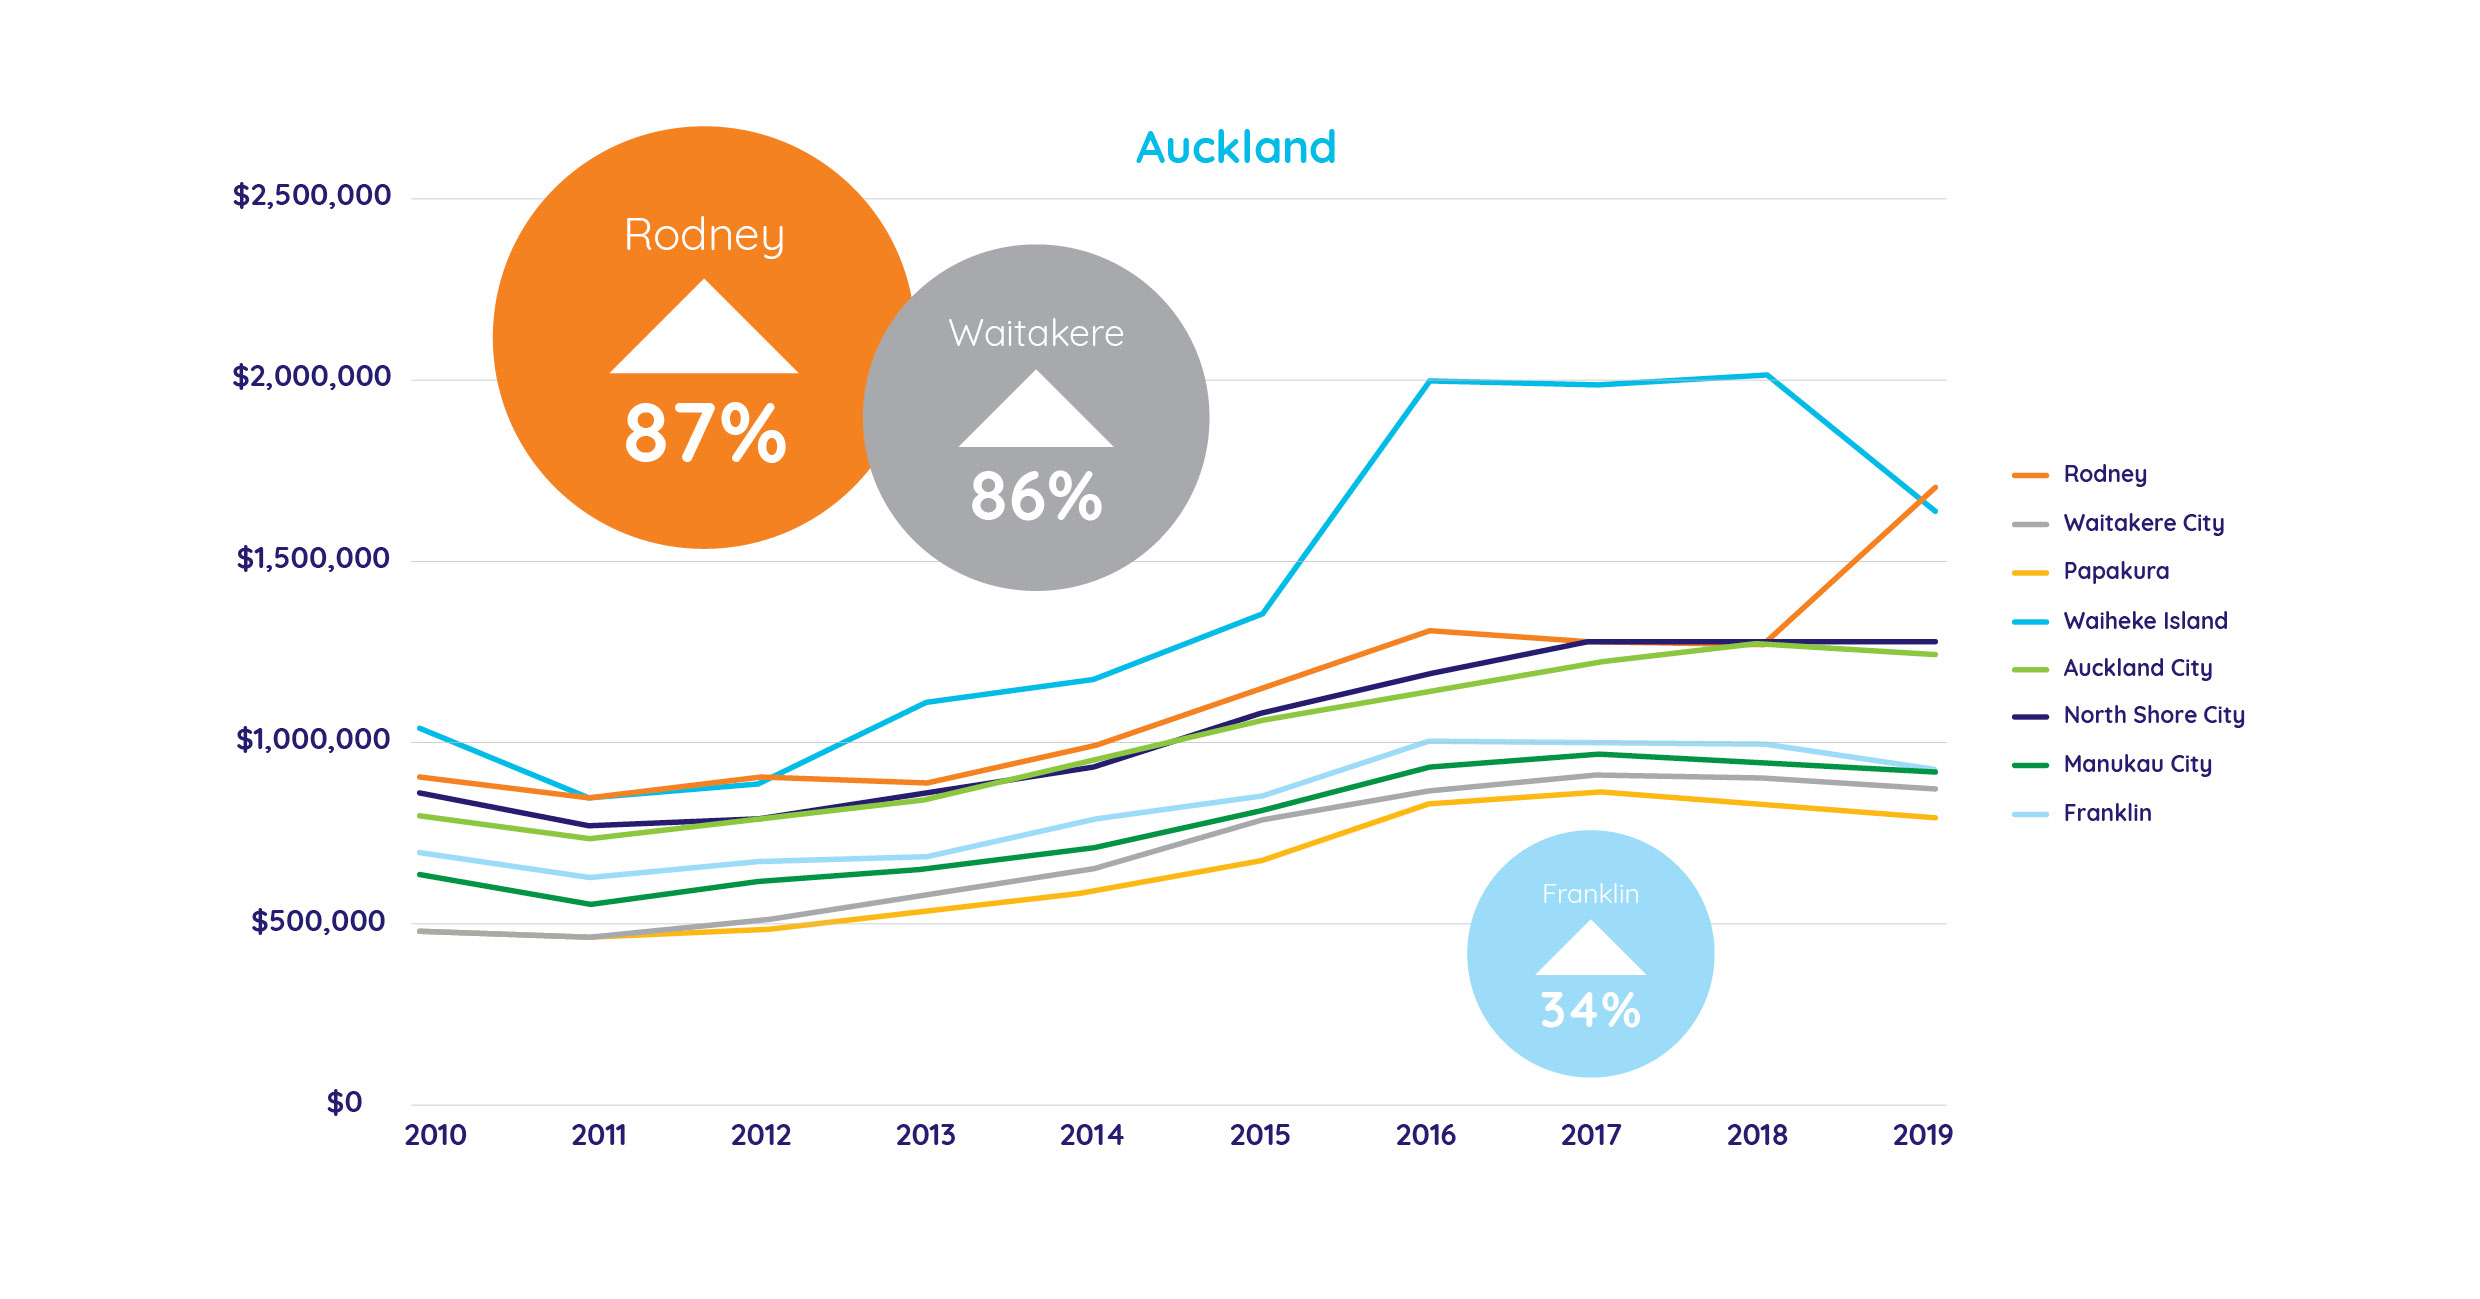 Average asking prices in Auckland over the last 10 years